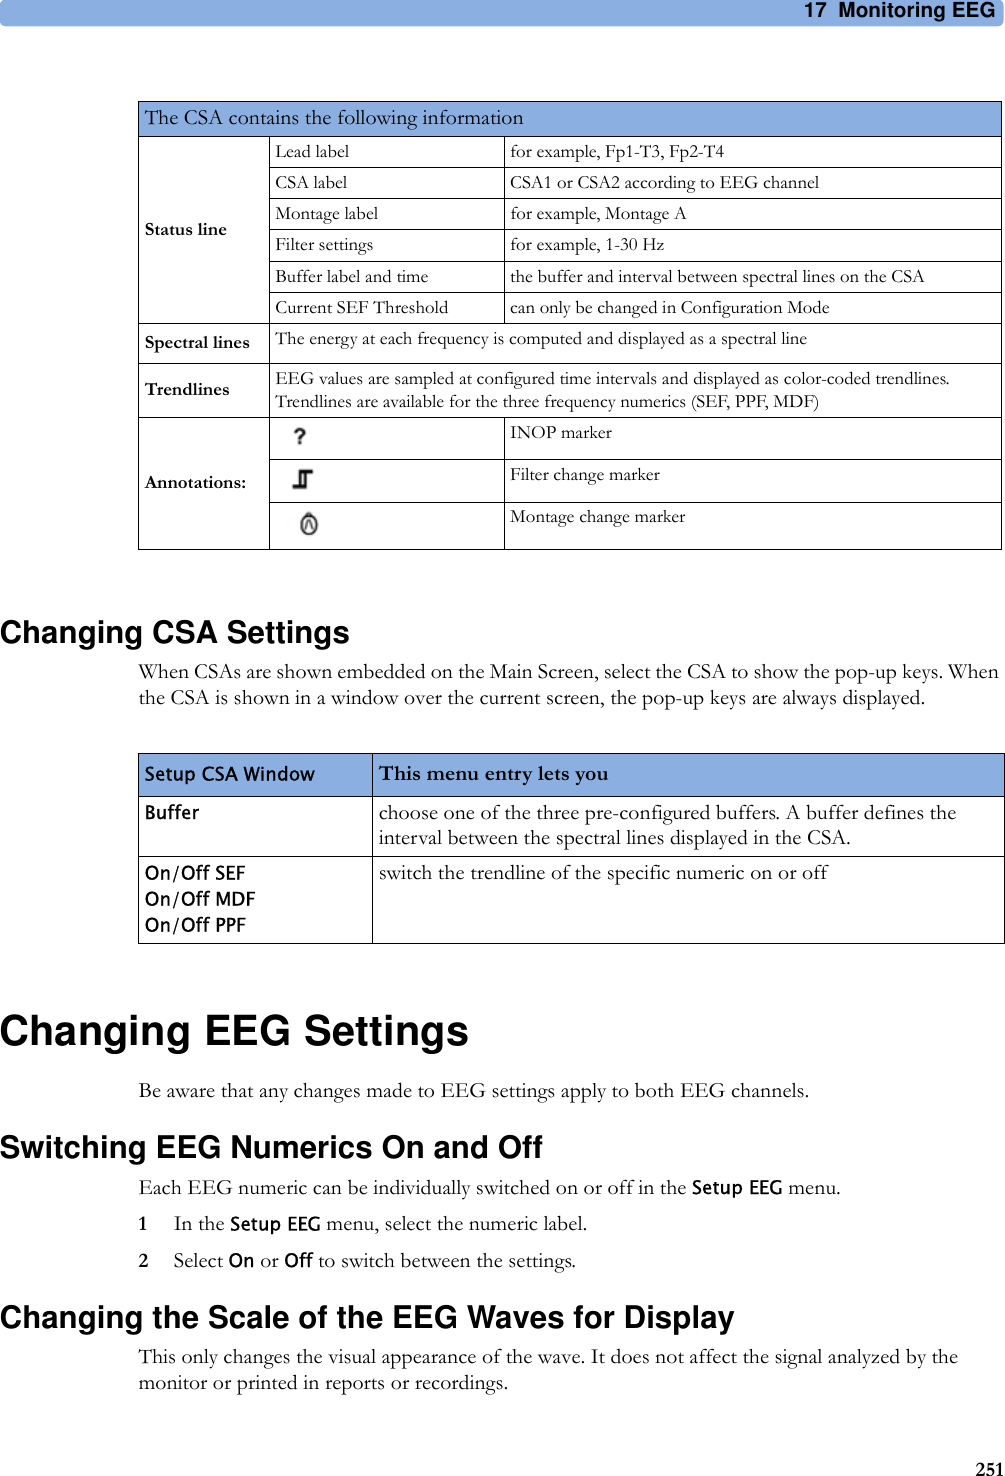 17 Monitoring EEG251Changing CSA SettingsWhen CSAs are shown embedded on the Main Screen, select the CSA to show the pop-up keys. When the CSA is shown in a window over the current screen, the pop-up keys are always displayed.Changing EEG SettingsBe aware that any changes made to EEG settings apply to both EEG channels.Switching EEG Numerics On and OffEach EEG numeric can be individually switched on or off in the Setup EEG menu.1In the Setup EEG menu, select the numeric label.2Select On or Off to switch between the settings.Changing the Scale of the EEG Waves for DisplayThis only changes the visual appearance of the wave. It does not affect the signal analyzed by the monitor or printed in reports or recordings.The CSA contains the following informationStatus lineLead label for example, Fp1-T3, Fp2-T4CSA label CSA1 or CSA2 according to EEG channelMontage label for example, Montage AFilter settings for example, 1-30 HzBuffer label and time the buffer and interval between spectral lines on the CSACurrent SEF Threshold can only be changed in Configuration ModeSpectral lines The energy at each frequency is computed and displayed as a spectral lineTrendlines EEG values are sampled at configured time intervals and displayed as color-coded trendlines. Trendlines are available for the three frequency numerics (SEF, PPF, MDF)Annotations:INOP markerFilter change markerMontage change markerSetup CSA Window This menu entry lets youBuffer choose one of the three pre-configured buffers. A buffer defines the interval between the spectral lines displayed in the CSA. On/Off SEFOn/Off MDFOn/Off PPFswitch the trendline of the specific numeric on or off